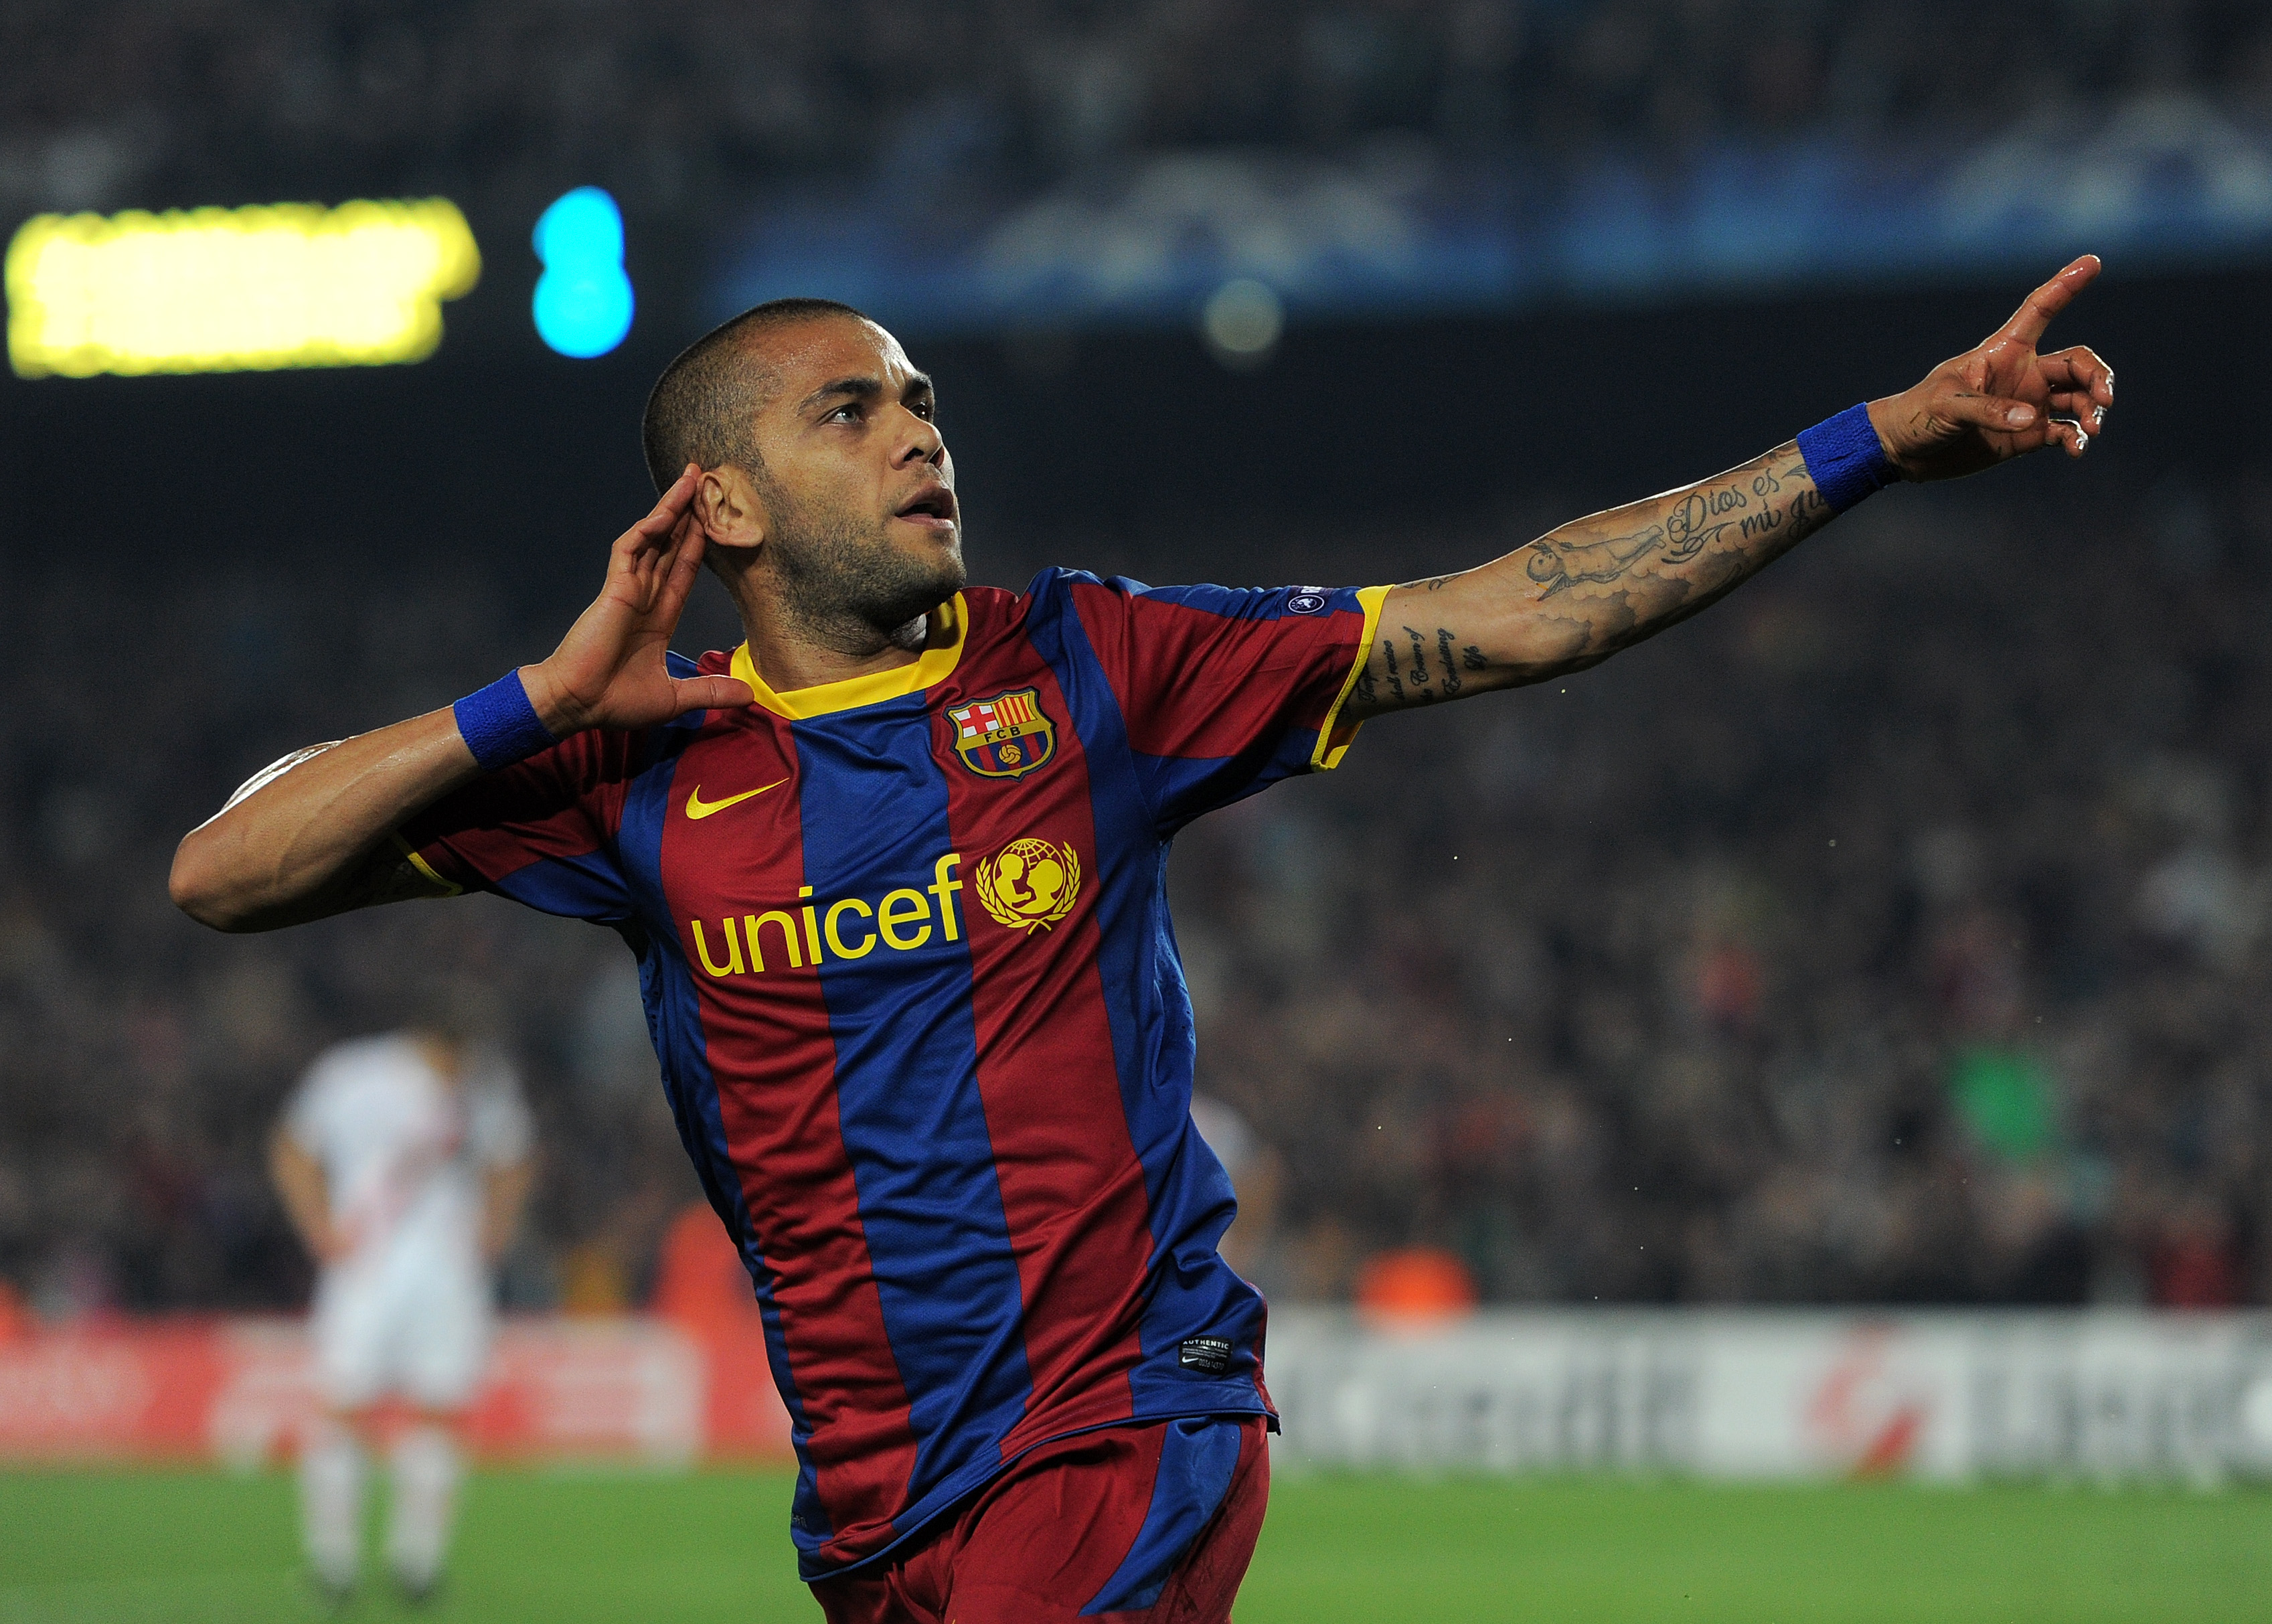 BARCELONA, SPAIN - APRIL 06:  Daniel Alves of Barcelona celebrates scoring his sides second goal during the UEFA Champions League quarter final first leg match between Barcelona and Shakhtar Donetsk at the Camp Nou stadium on April 6, 2011 in Barcelona, S